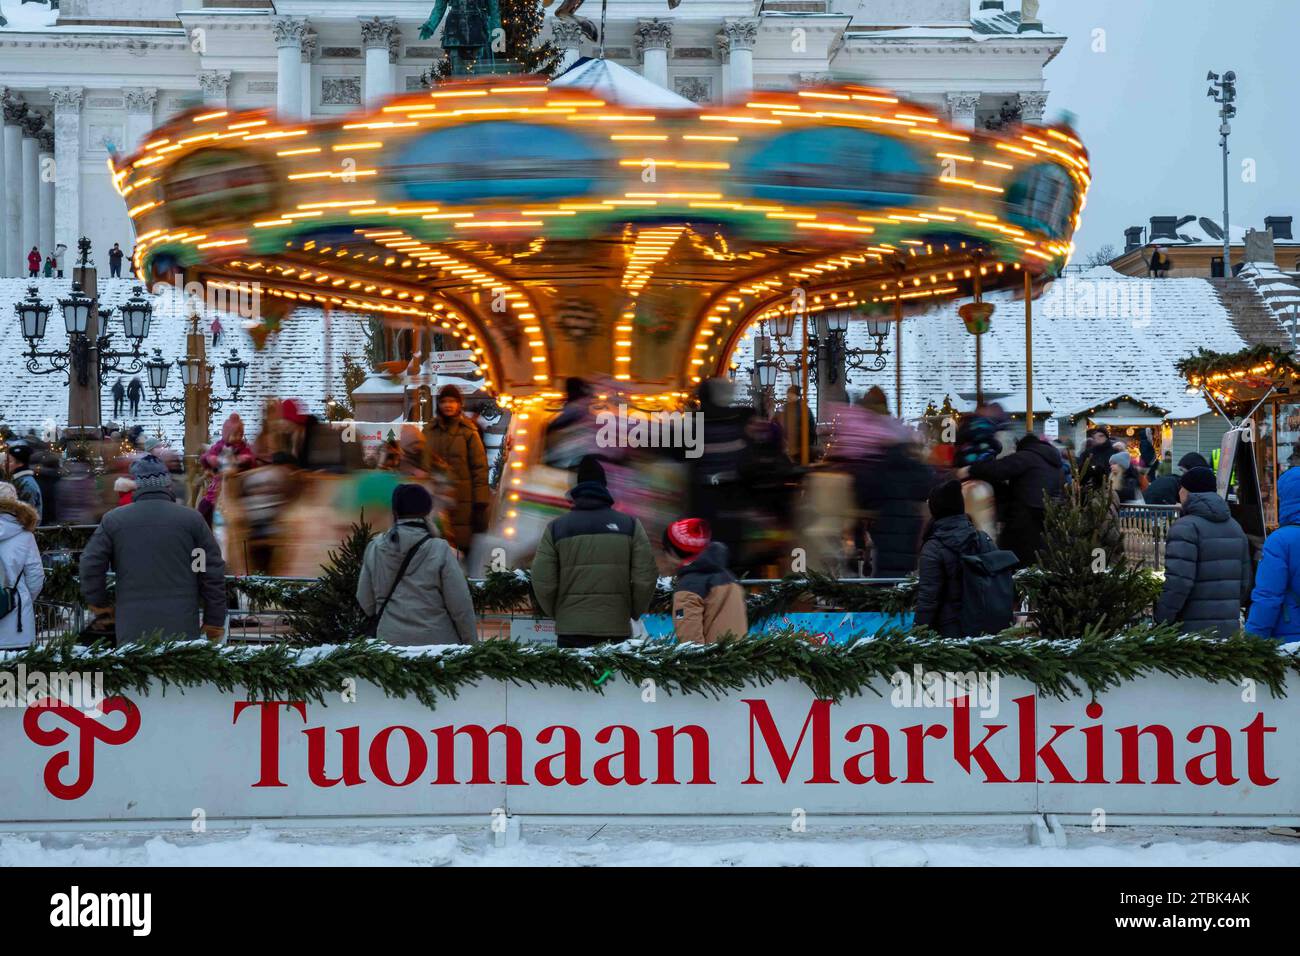 Blurred motion on the Venetian Carousel at Tuomaan Markkinat or Christmas Market on Senate Square in Helsinki, Finland Stock Photo